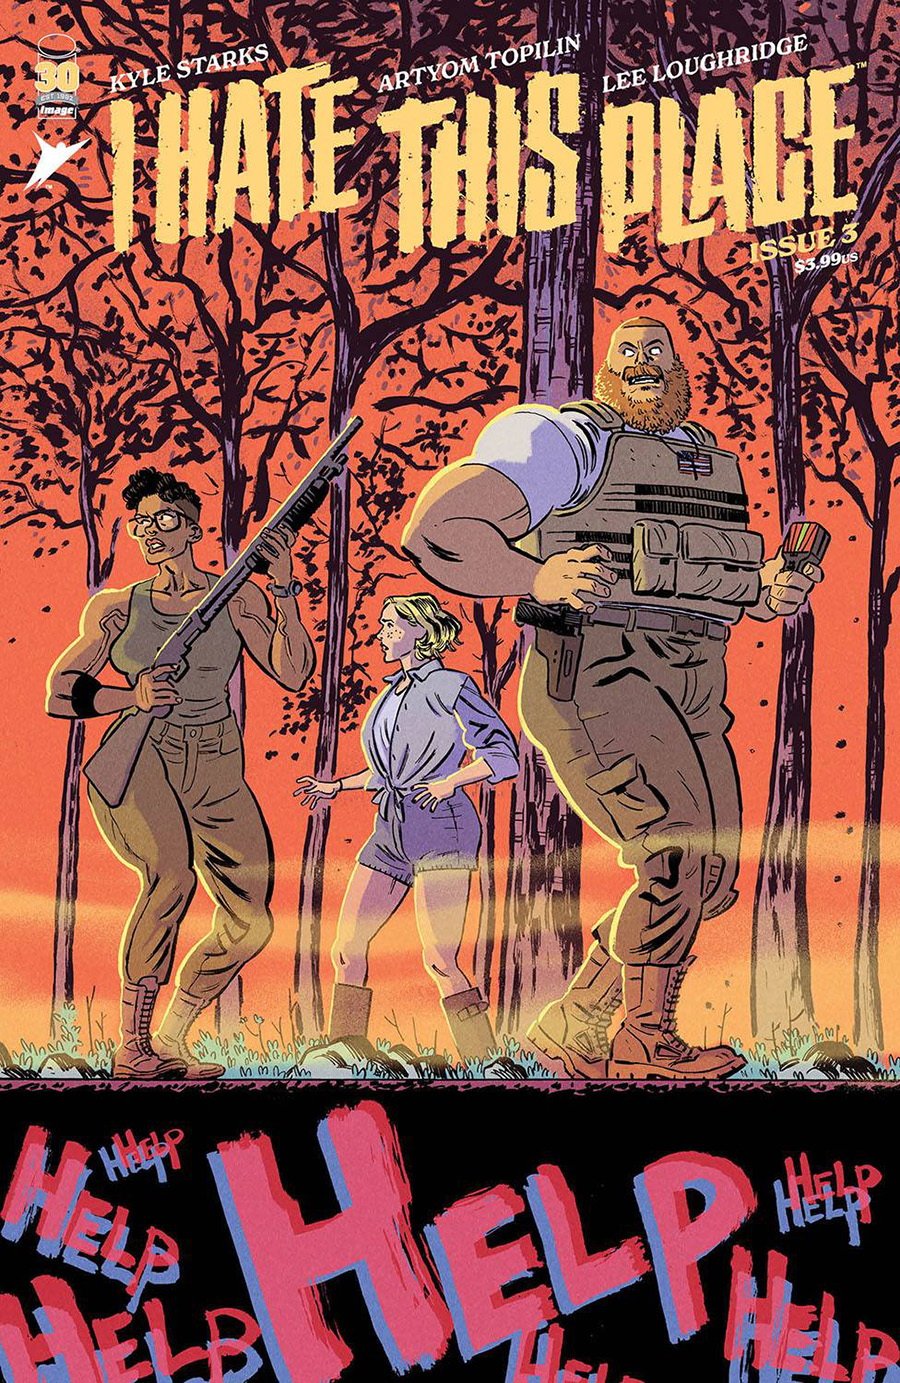 I Hate This Place #3 Cover A Regular Artyom Topilin & Lee Loughridge Cover